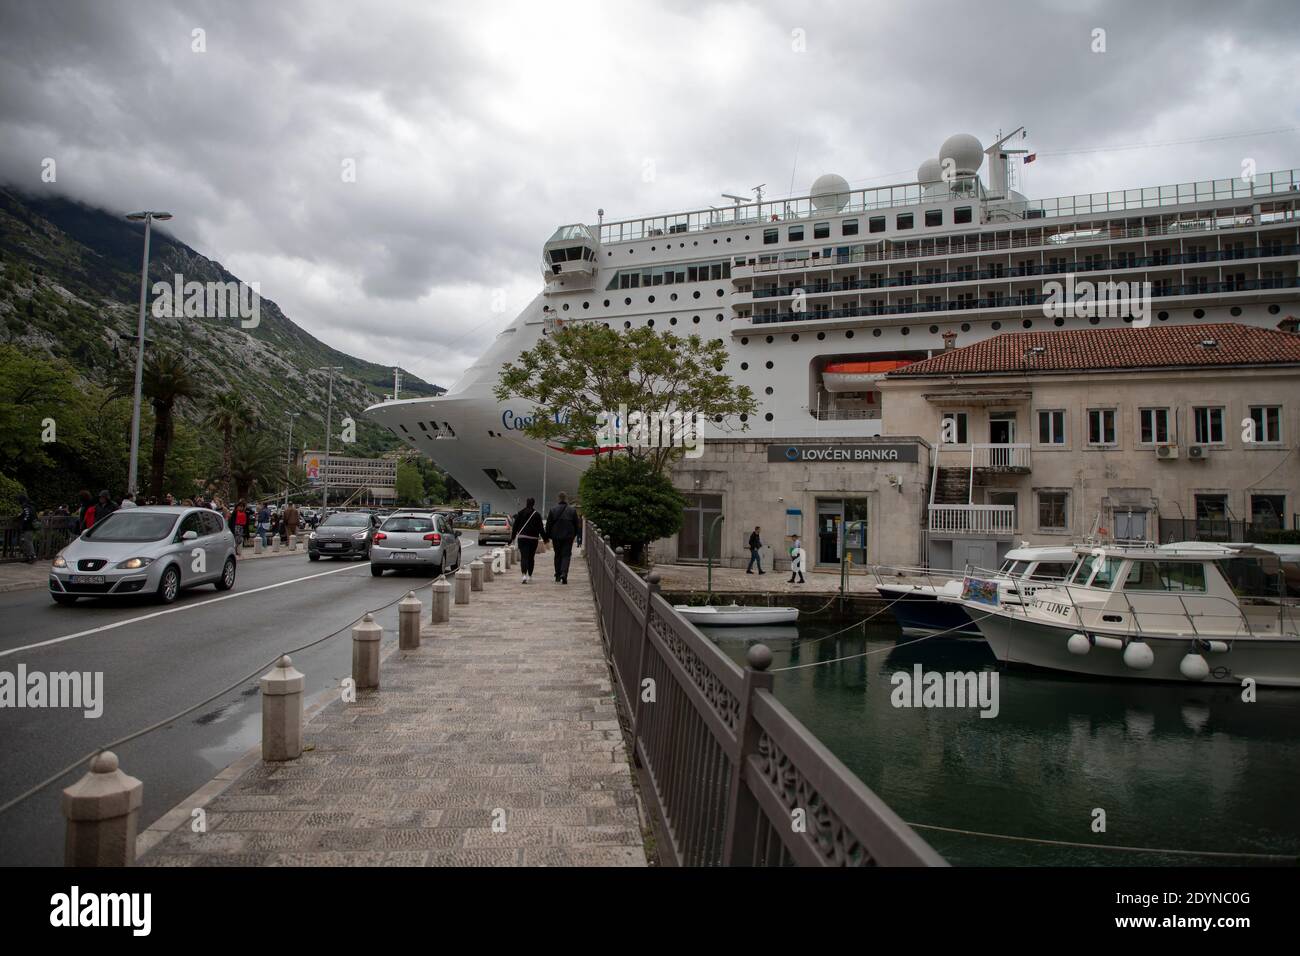 Montenegro, Apr 30, 2019: View of the Port of Kotor Stock Photo